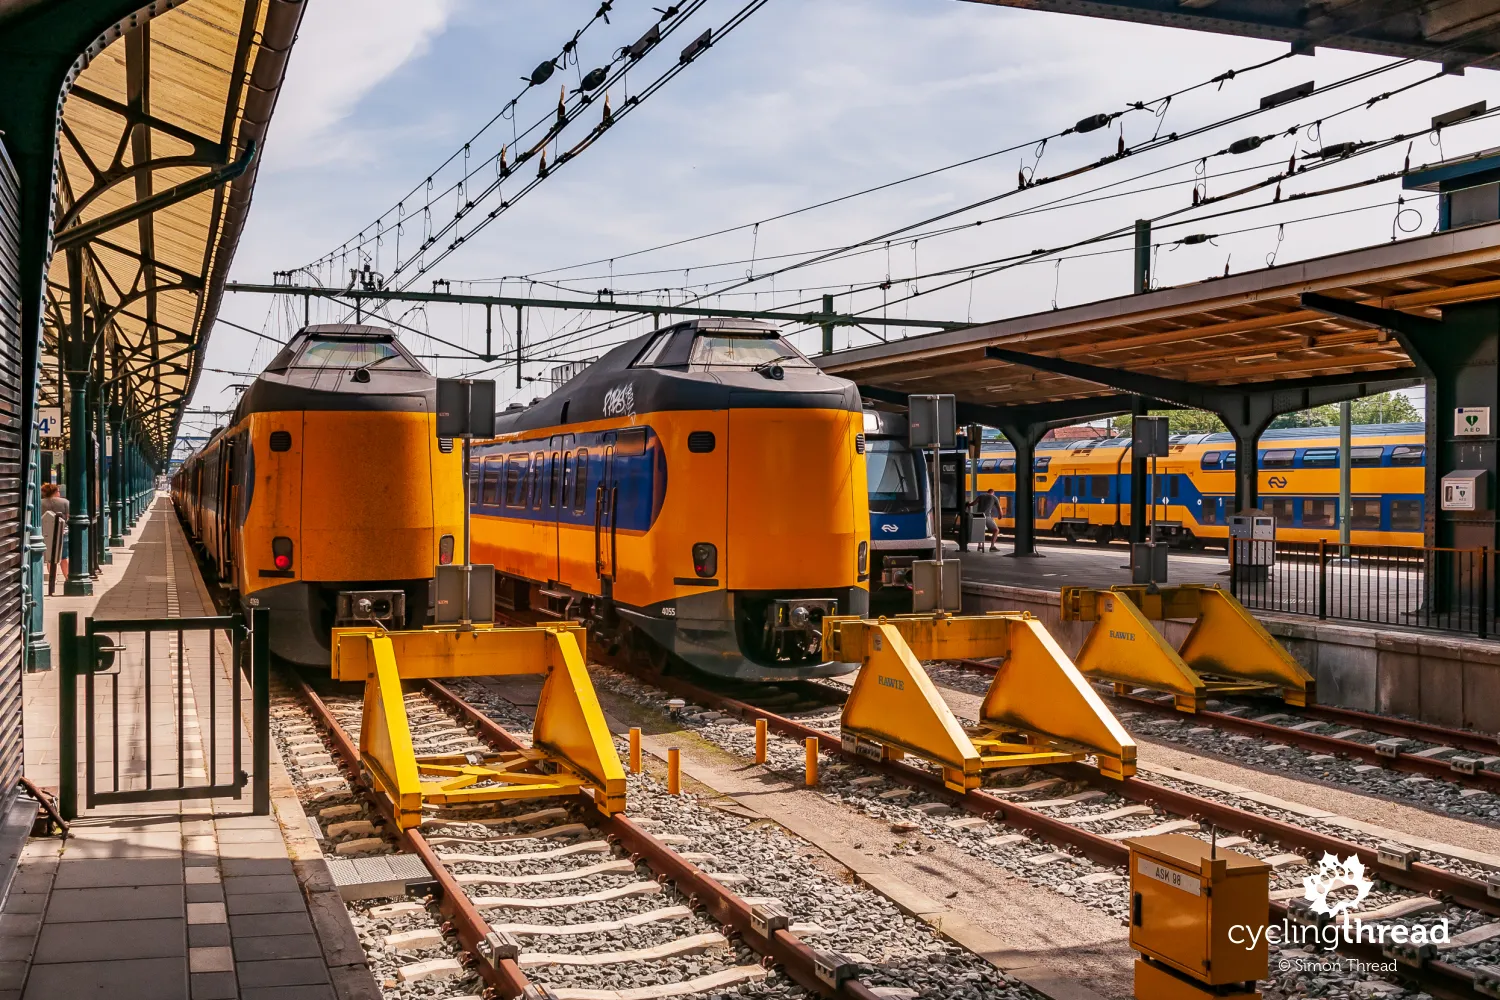 Regional trains in the Netherlands